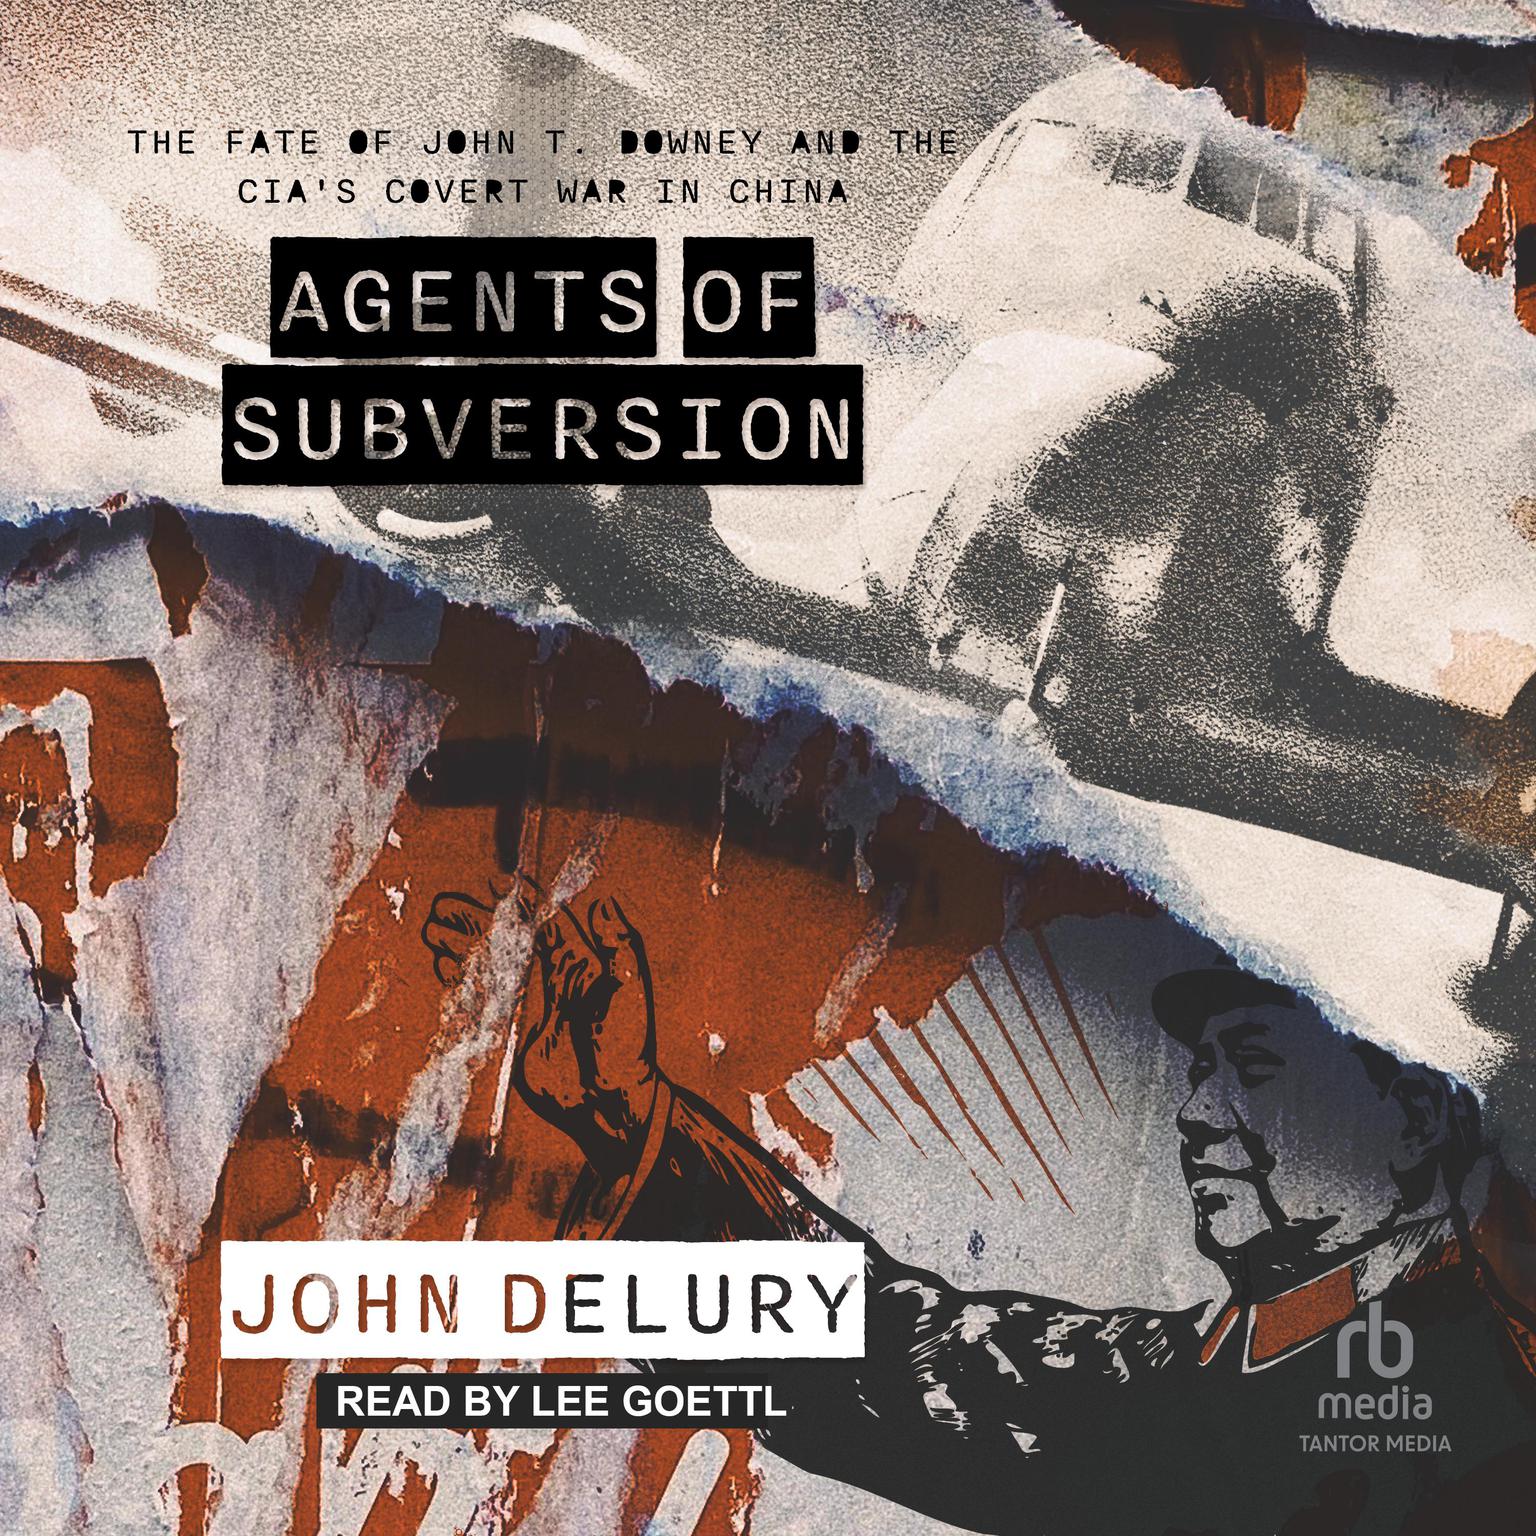 Agents of Subversion: The Fate of John T. Downey and the CIAs Covert War in China Audiobook, by John Delury